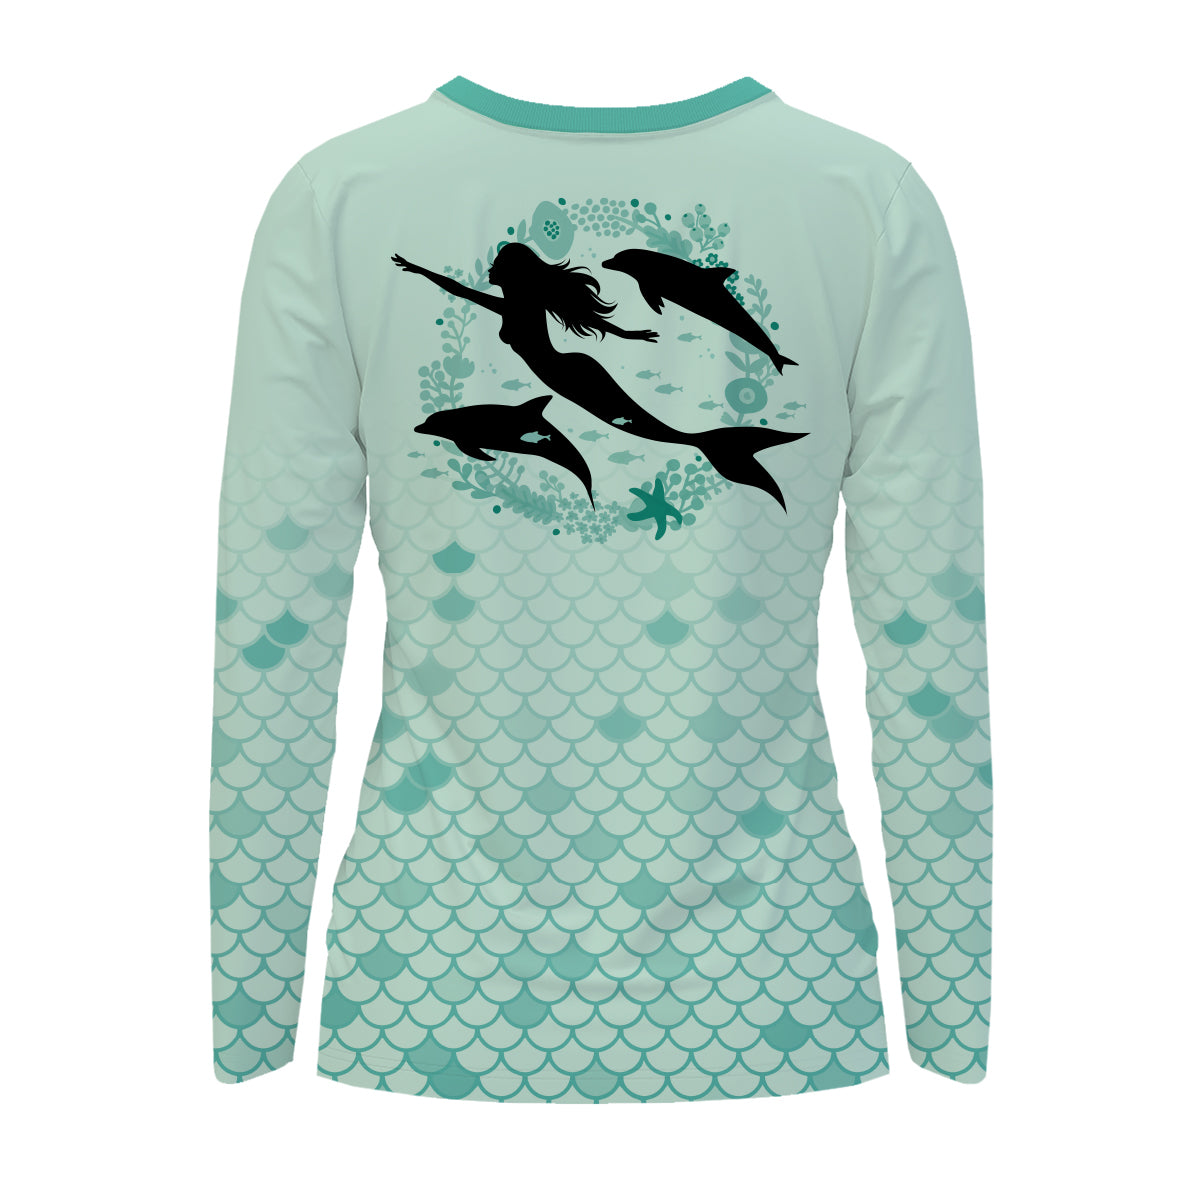 Women's Mermaid & Dolphins Performance Long Sleeve Shirt with